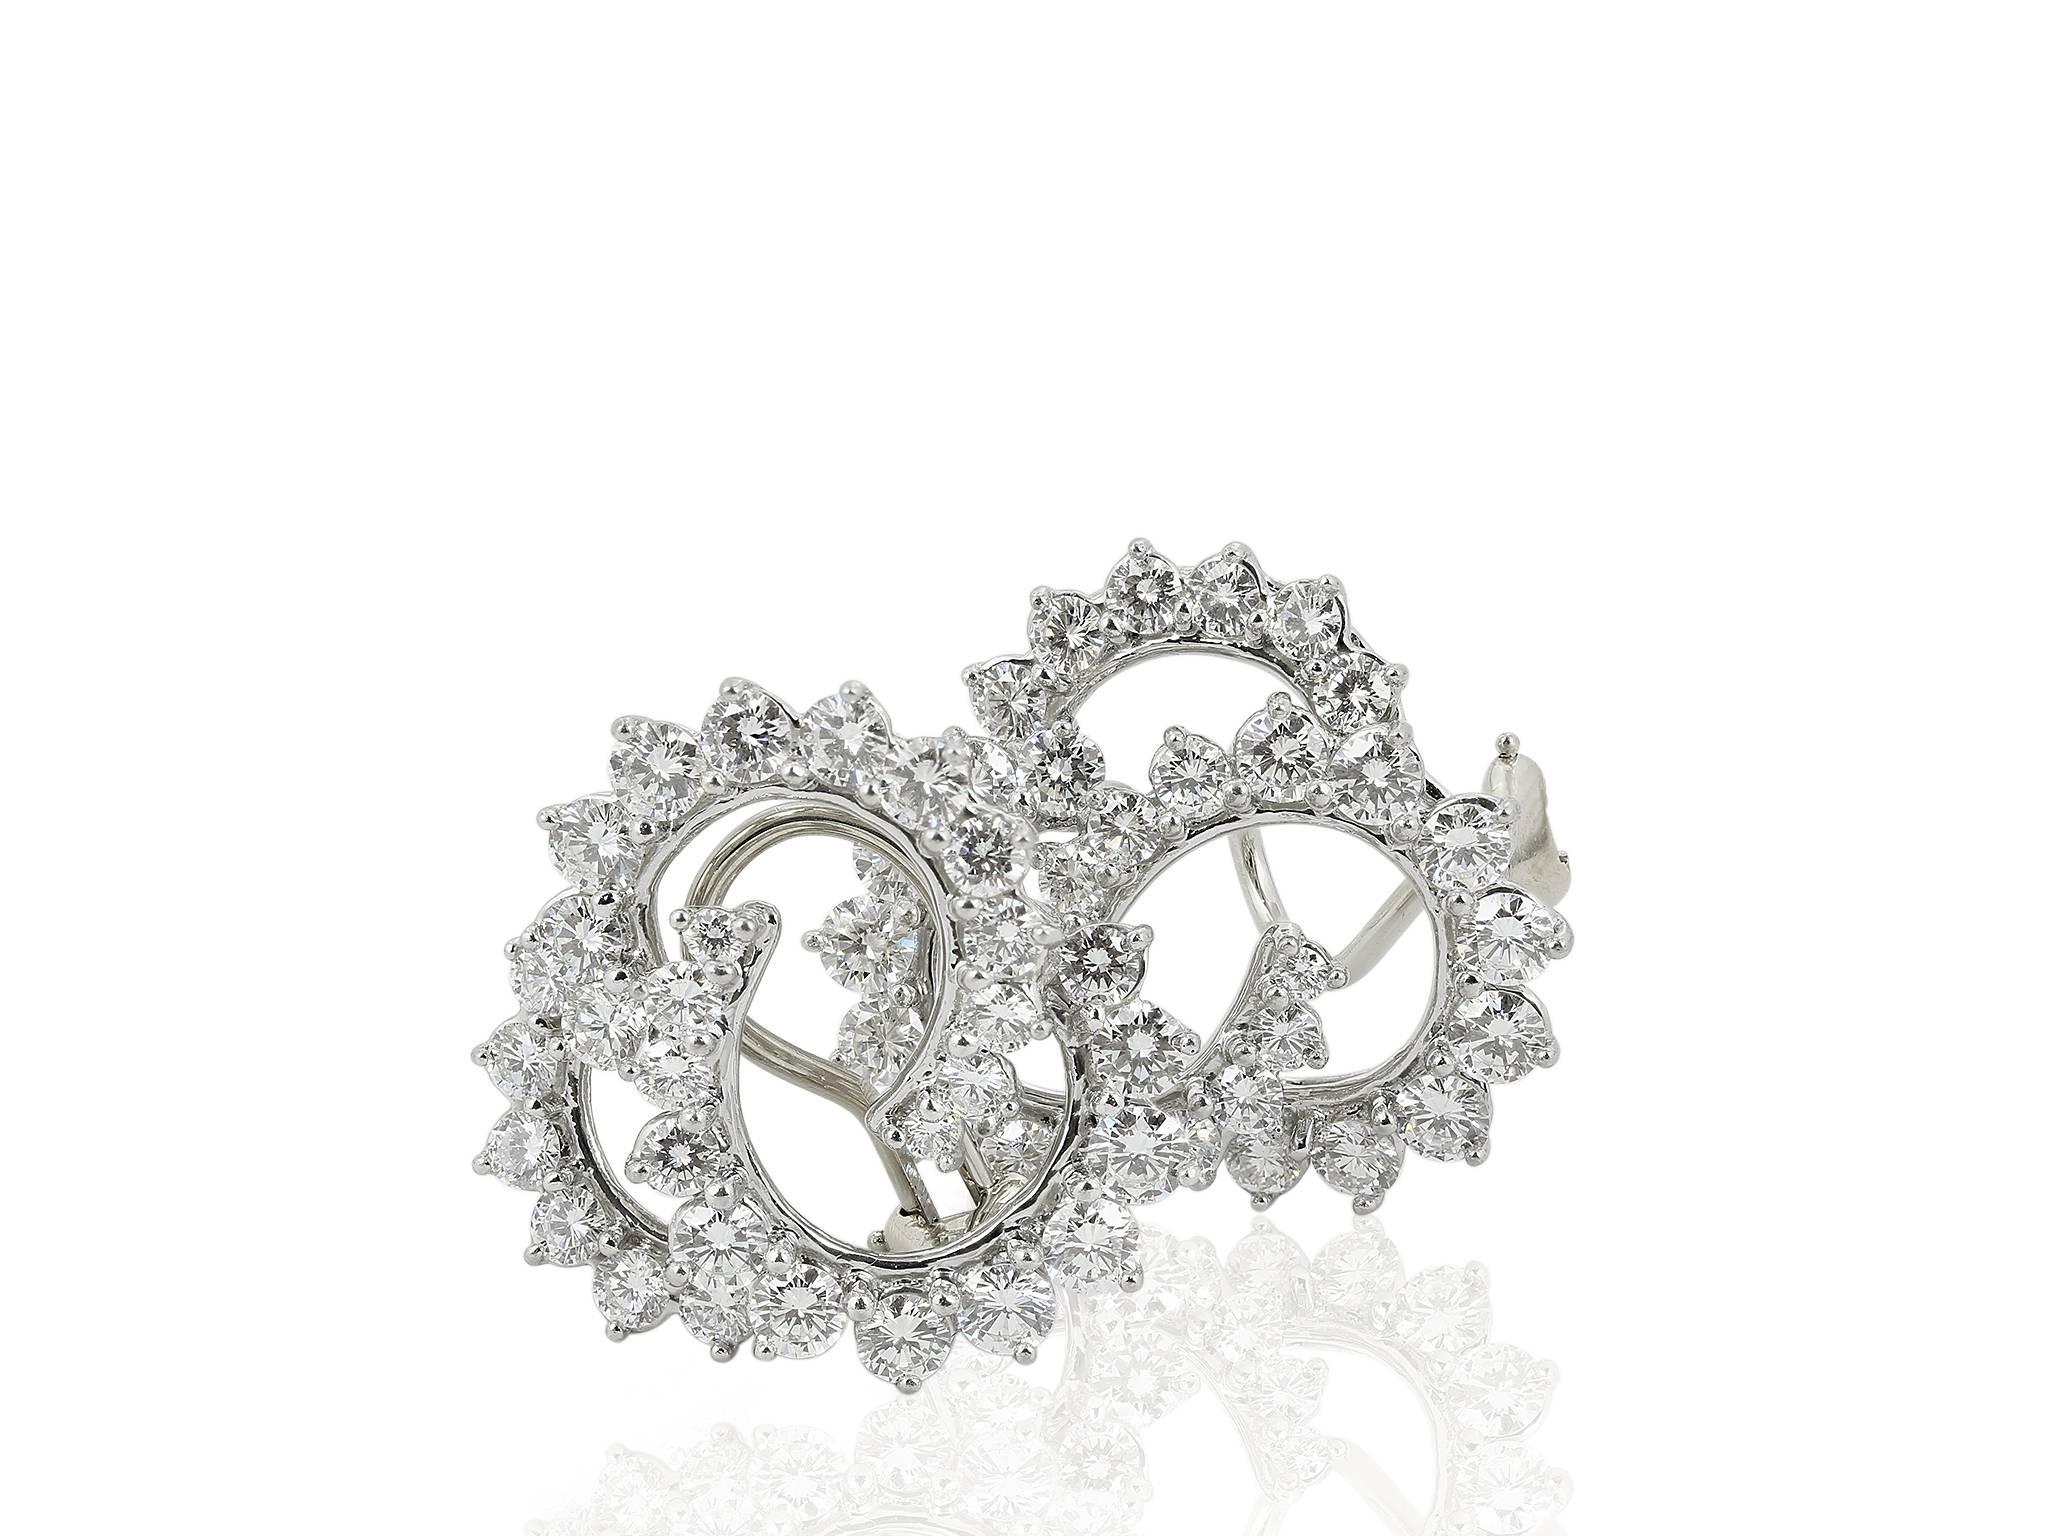 Platinum estate clip earrings consisting of 60 round brilliant cut diamonds having a total weight of approximately 7.50 carats, the earrings are signed Angela Cummings 1995